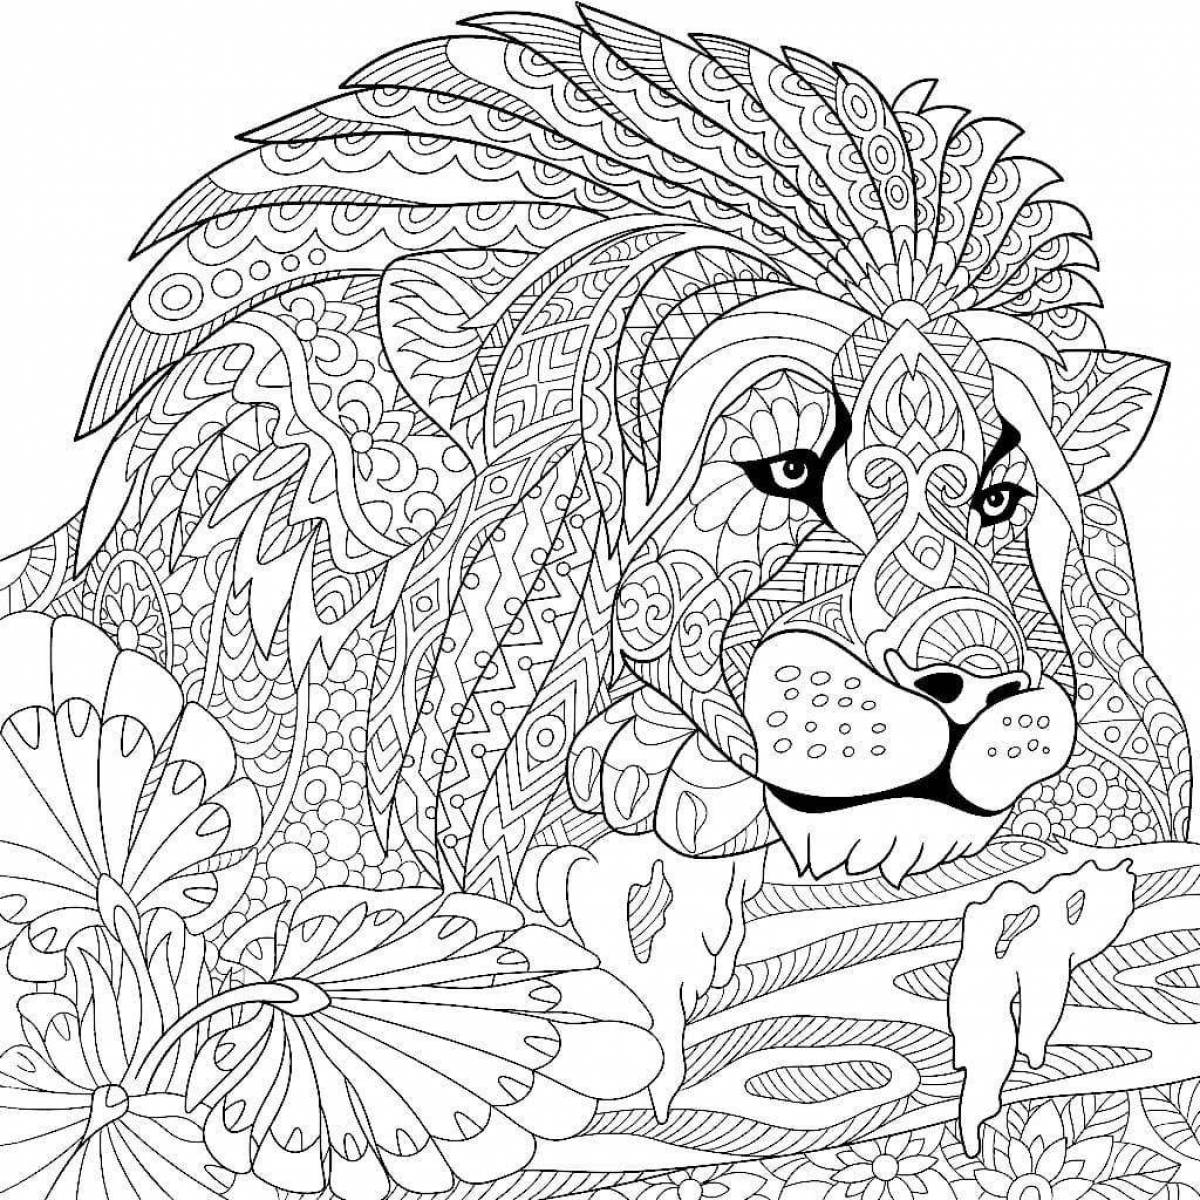 Incredible coloring for girls 12 years old animals